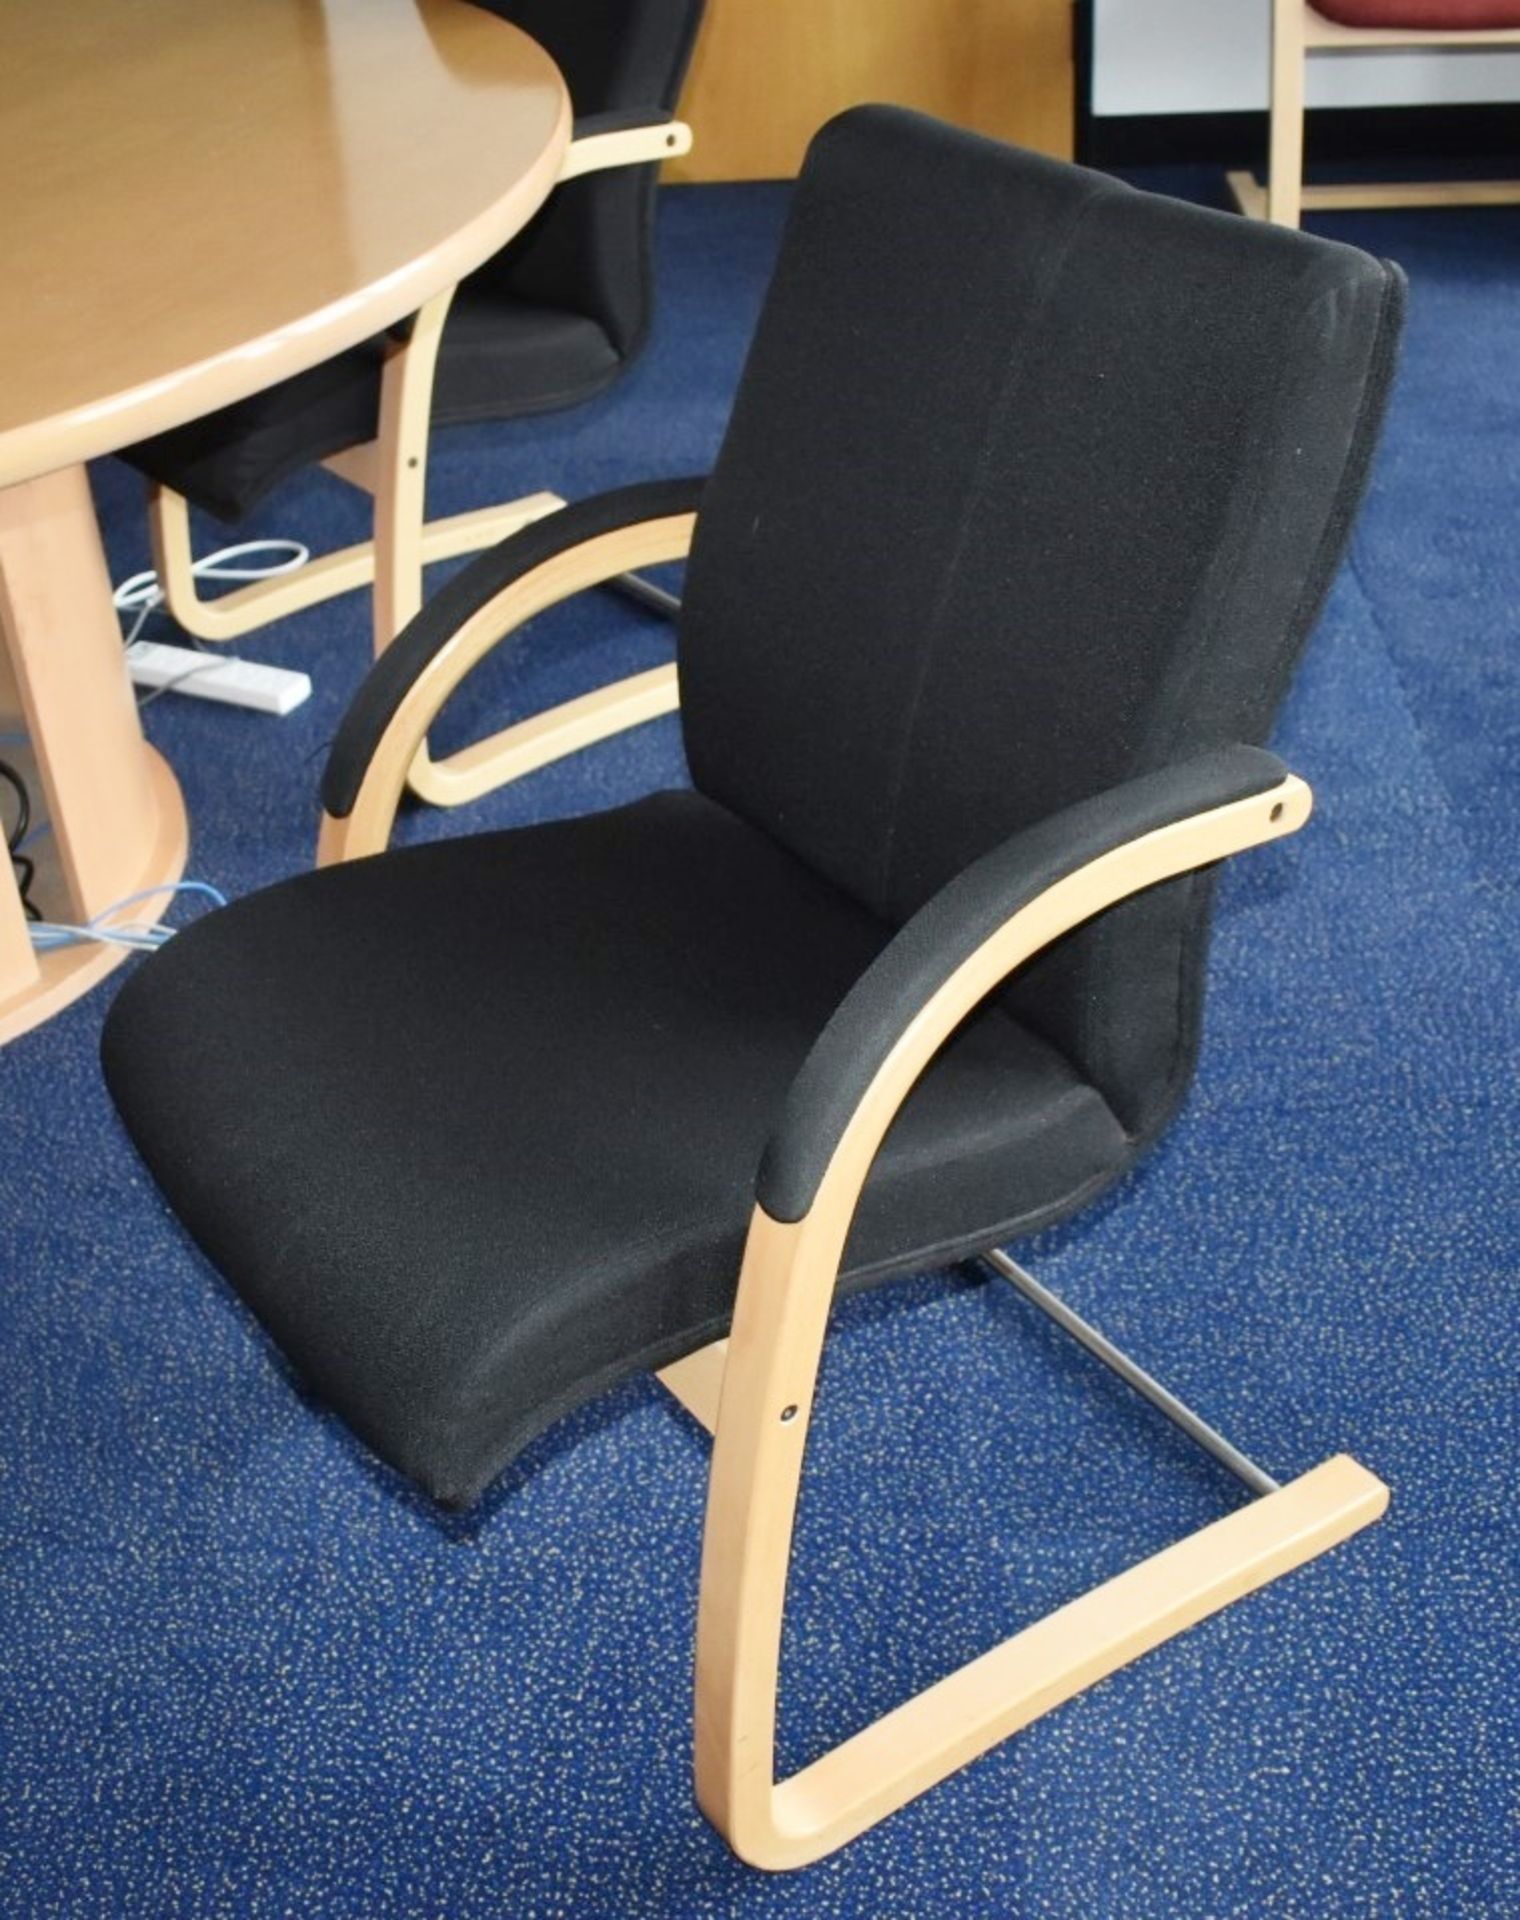 4 x Cantilever Office Meeting Chairs With Bentwood Frames and Black Fabric Seats -Â Manufactured - Image 5 of 7